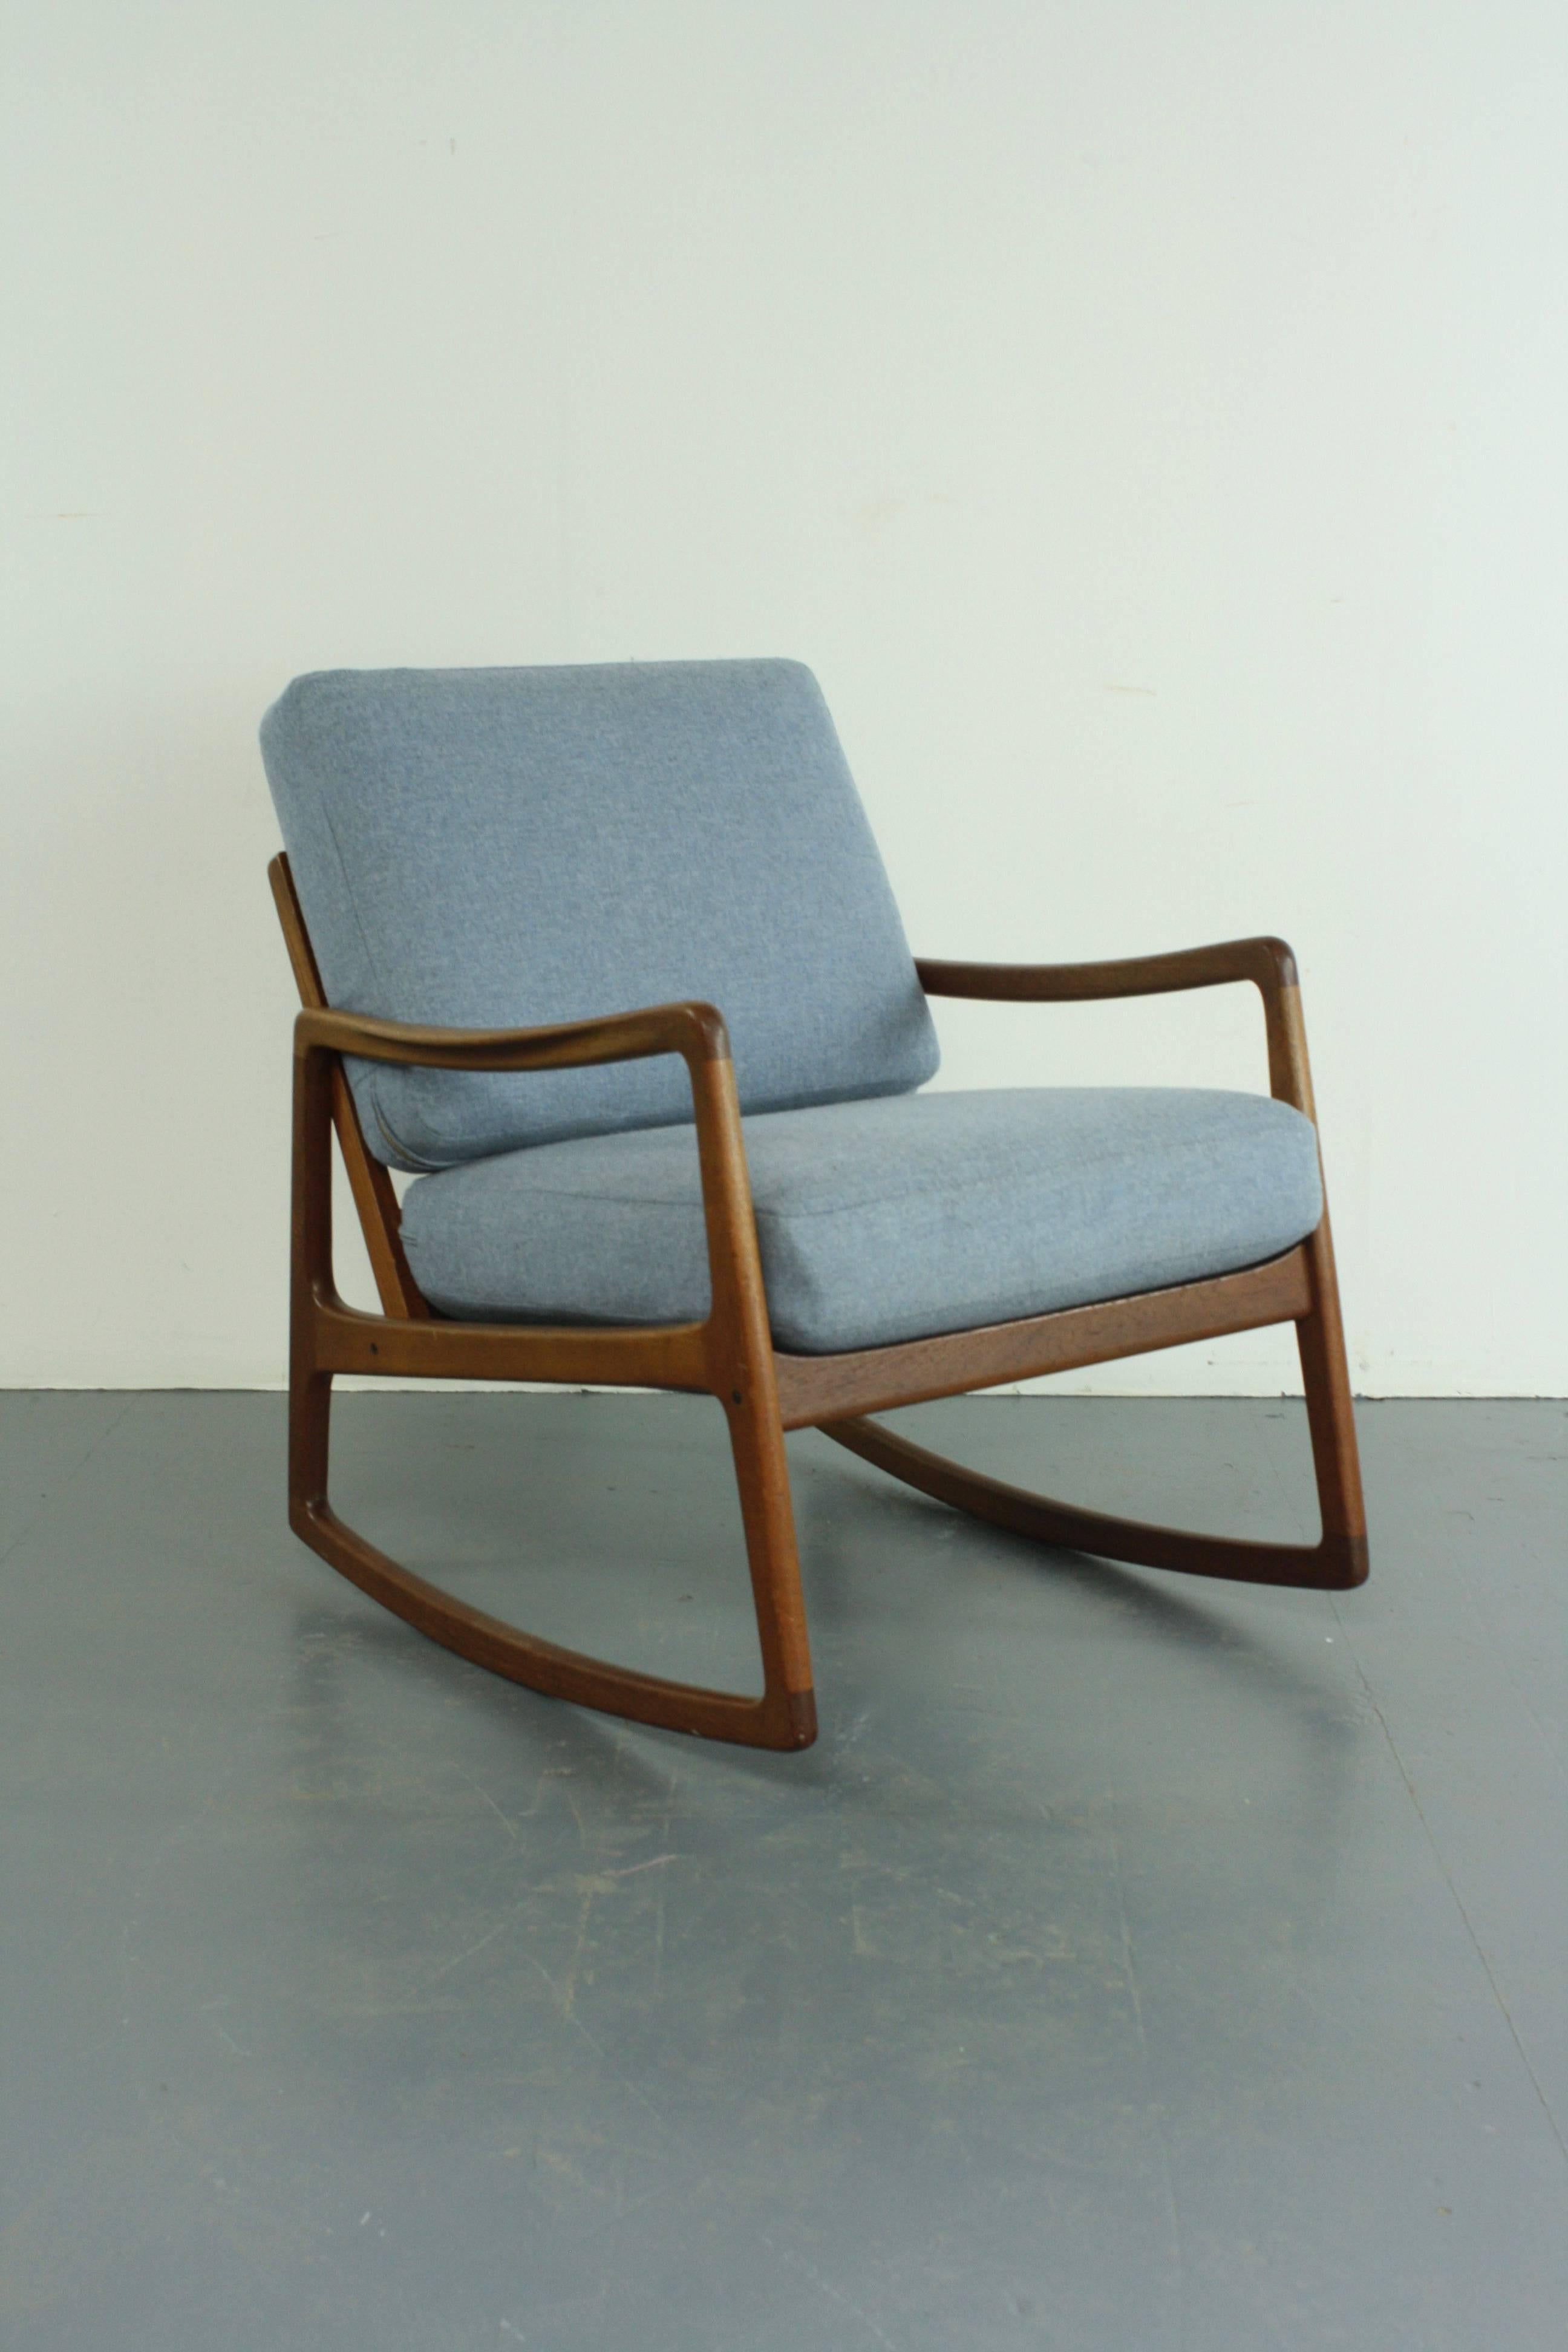 1950s solid teak rocking chair designed by Ole Wanscher for France & Son, Denmark.

With newly upholstered cushions in gorgeous blue Abraham Moon pure new wool.

Approximate dimensions:

Width: 61cm

Height: 76cm

Depth: 80cm

Seat